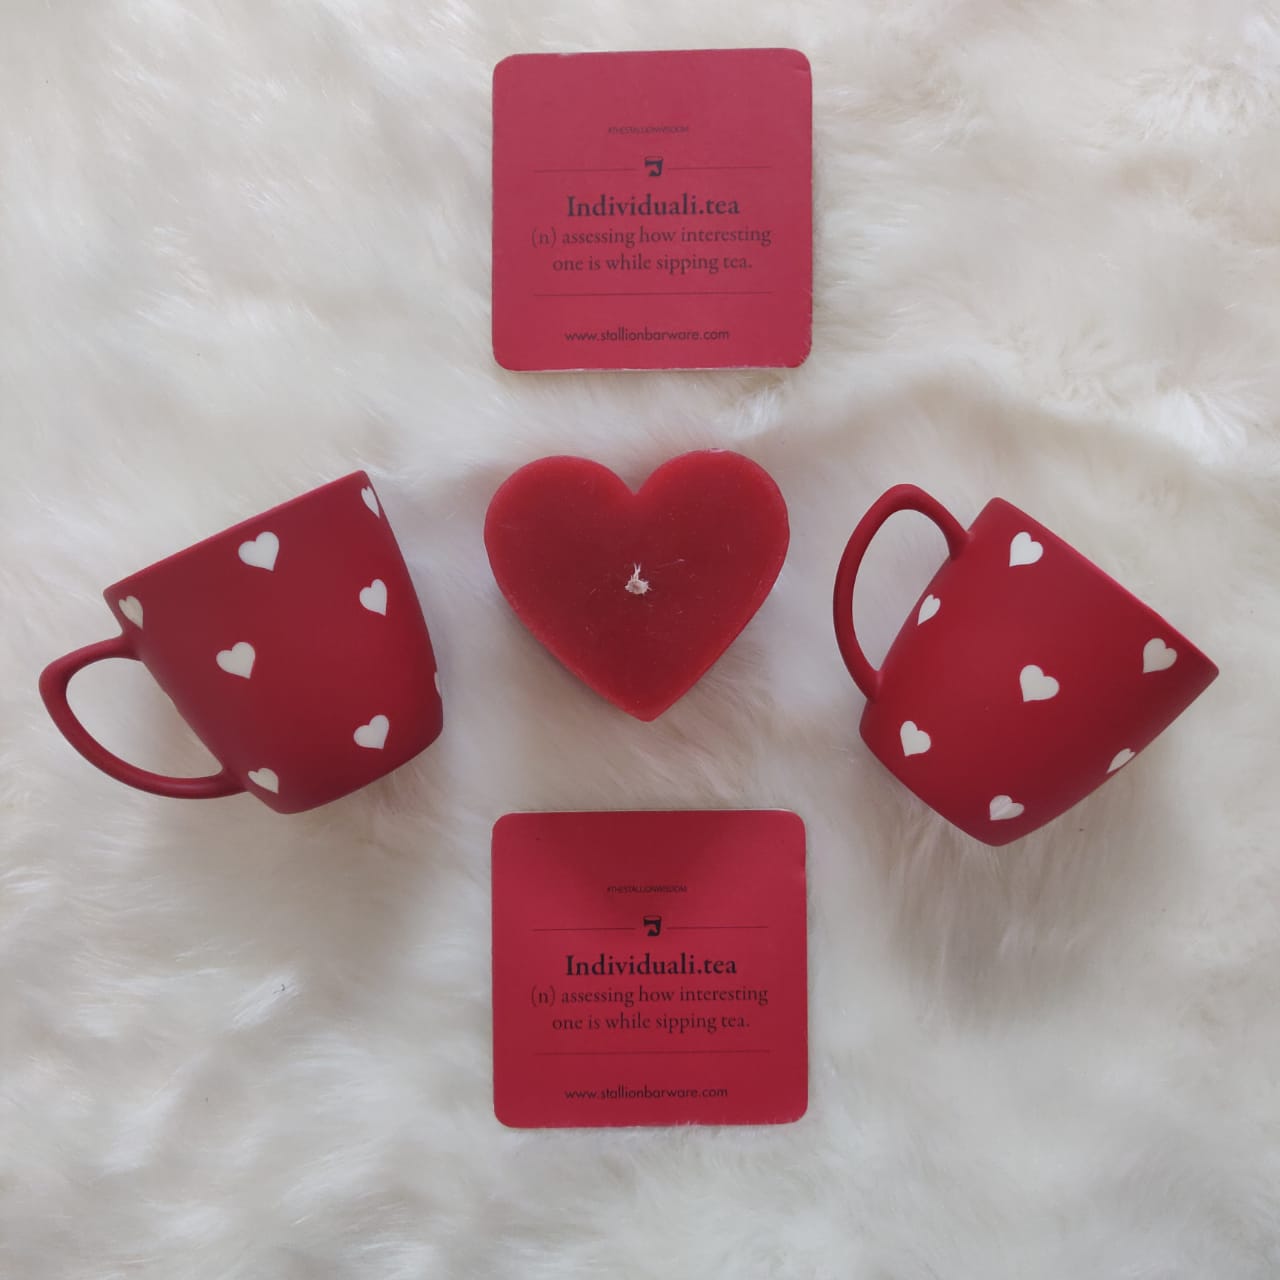 Unbreakable red designer tea cups with heart pattern (Set of 2) - Valentine's gift